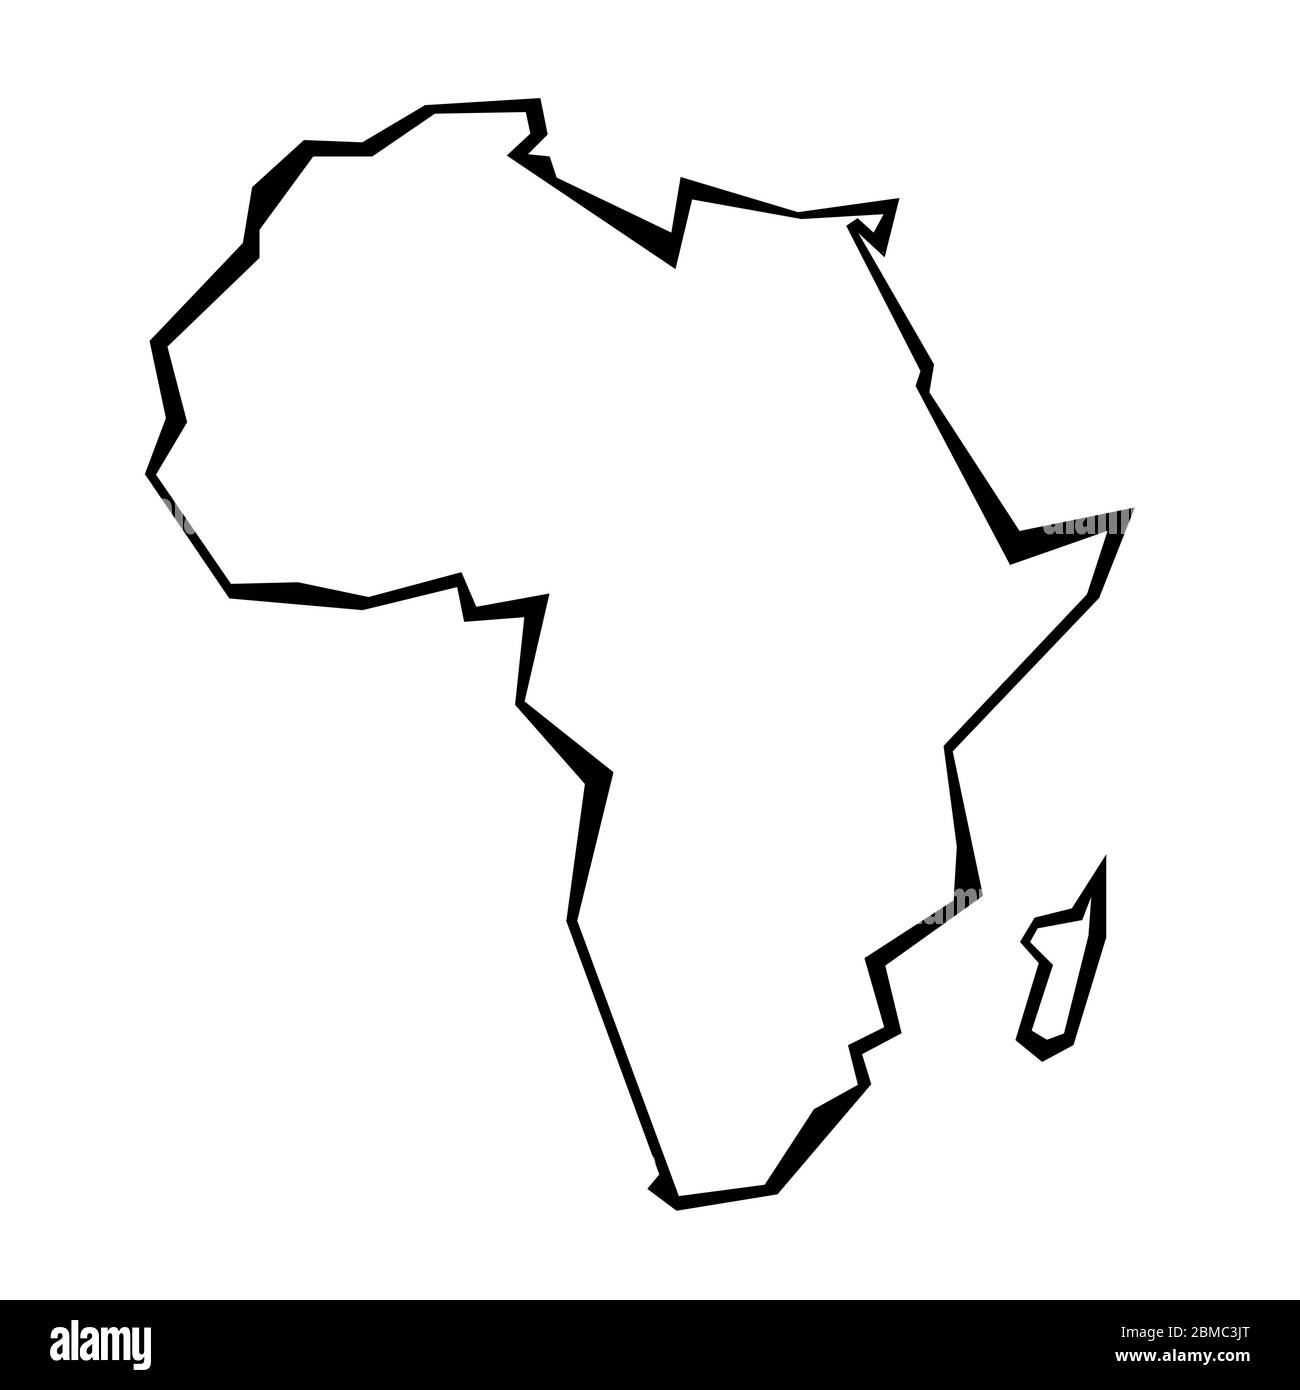 Africa map outline - continent shape sharp polygonal geometric style vector. Stock Vector